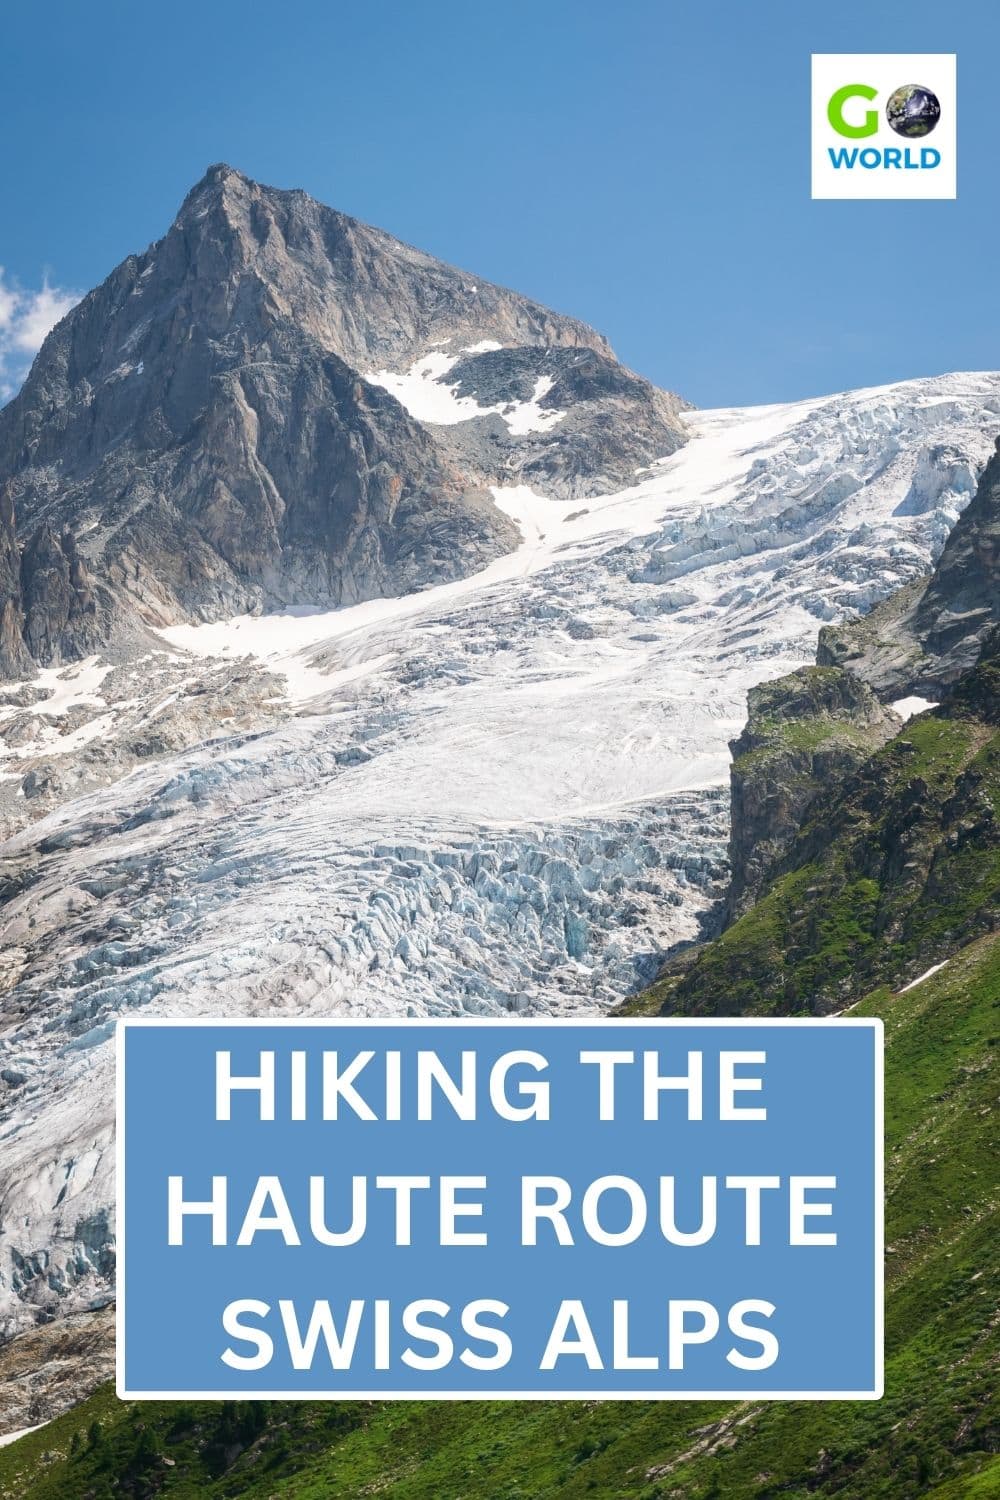 Hiking the HAUTE ROUTE SWISS ALPS